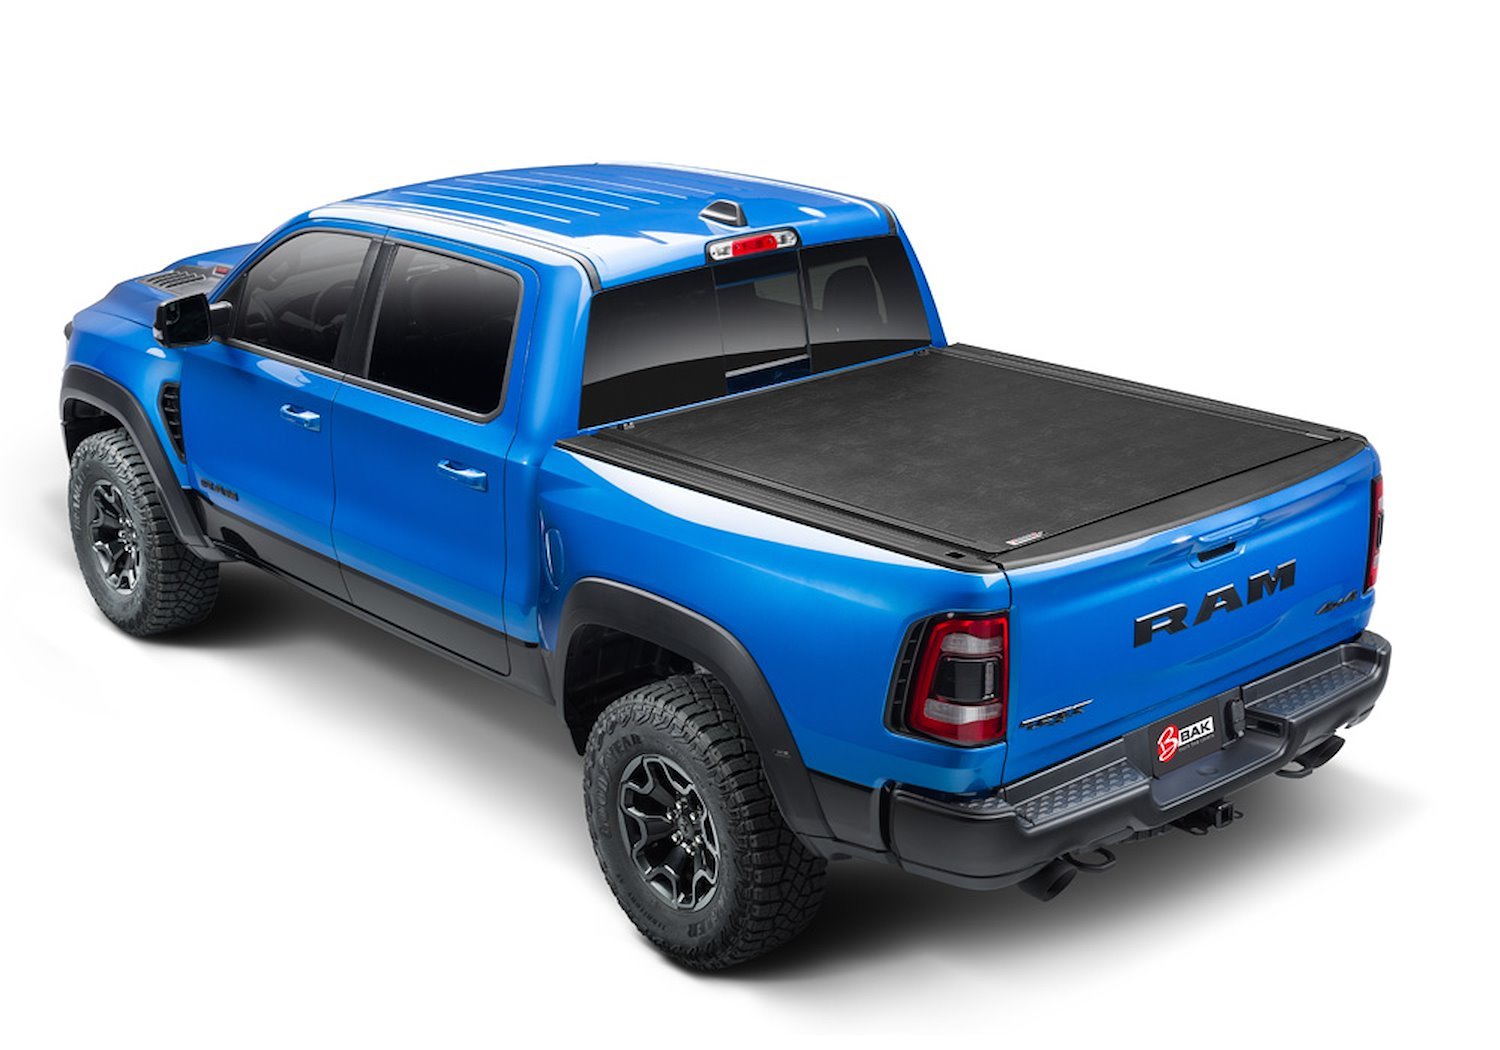 Revolver X2 Tonneau Cover Fits Select Dodge Ram without Ram Box (New Body Style 1500 Only), Bed Length: 6.4 ft.